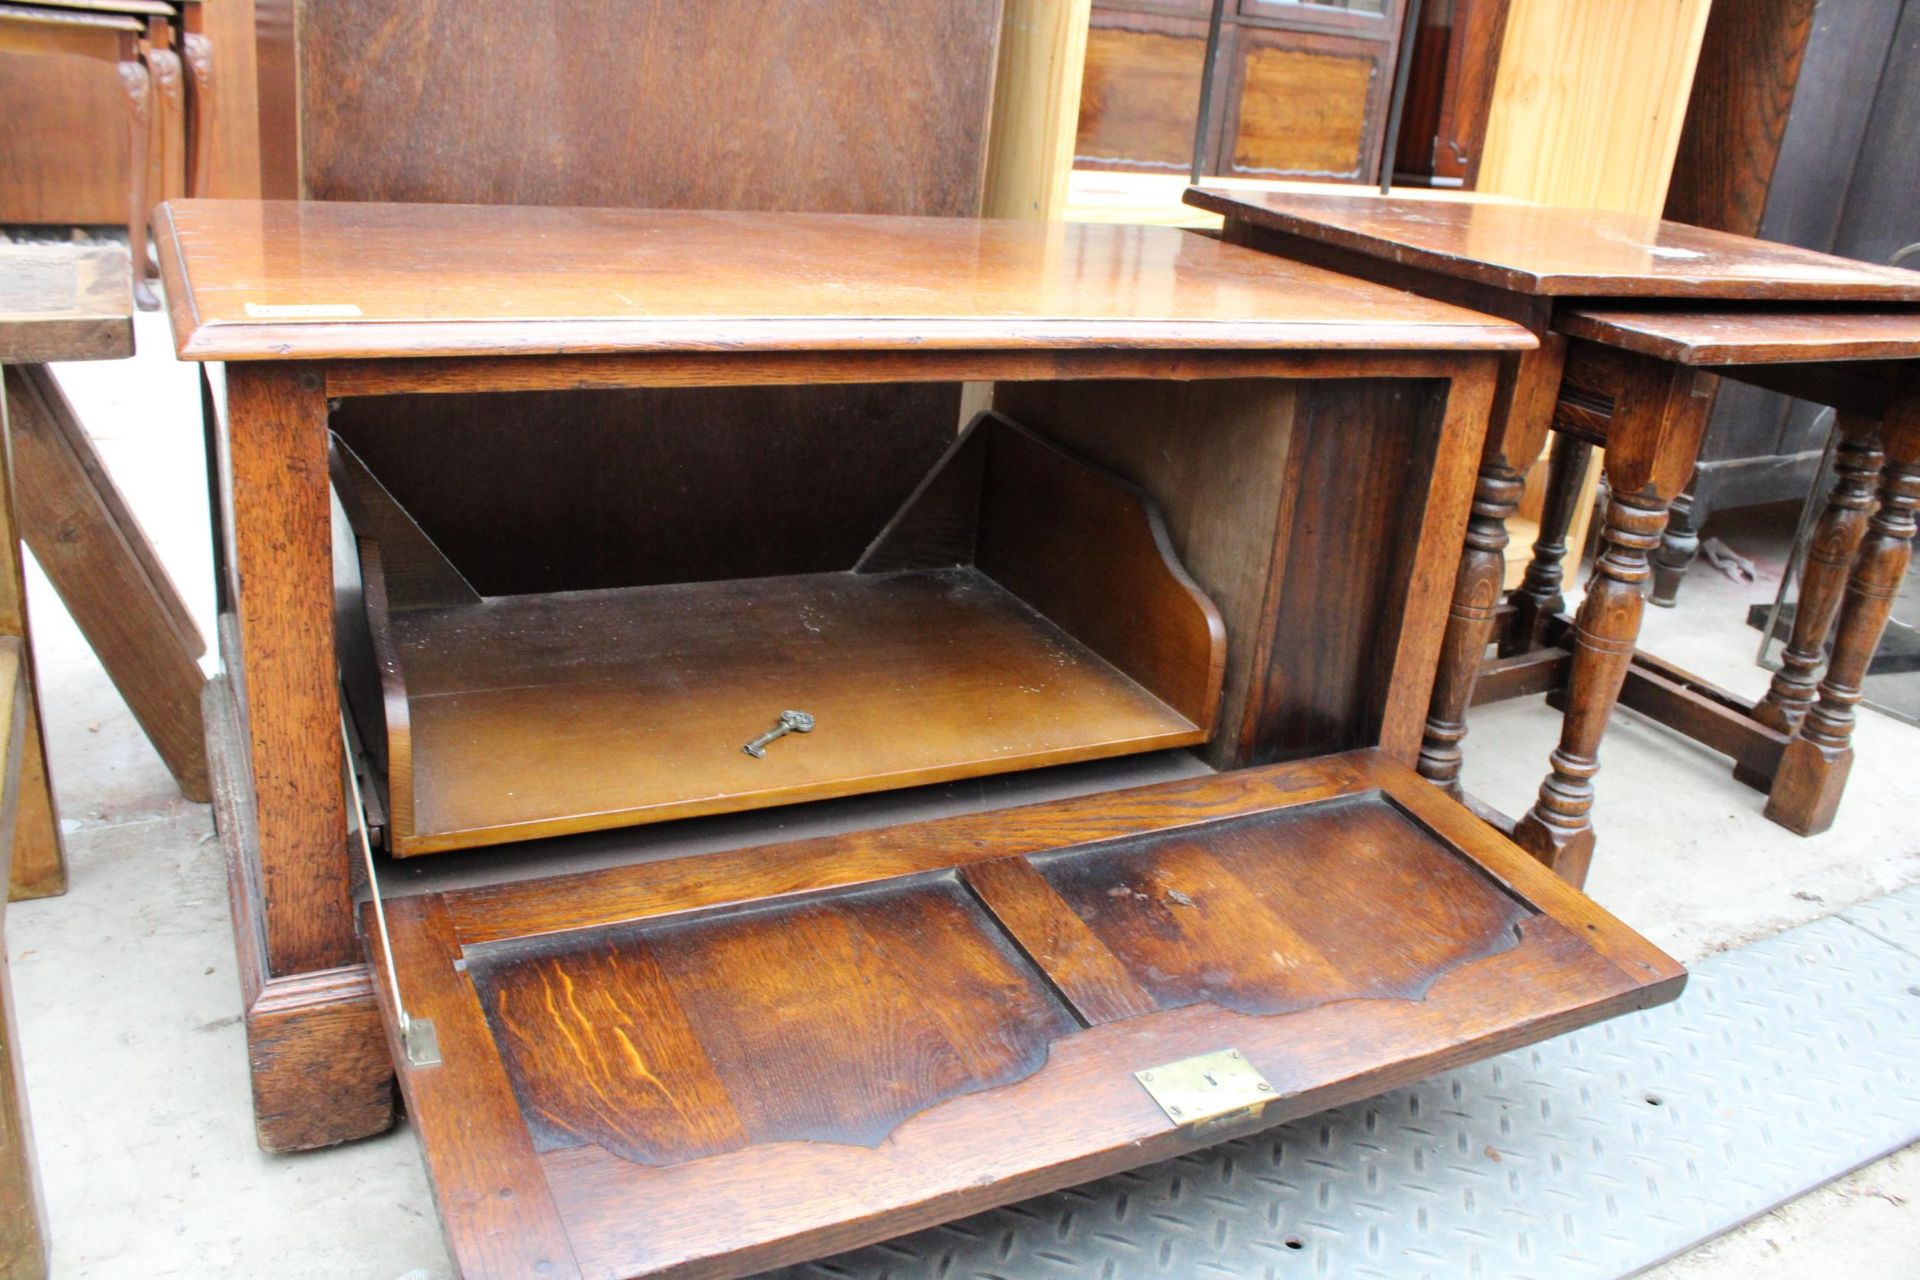 A MODERN OAK NEST OF TWO TABLES AND AN OAK ANTIQUE STYLE CABINET - Image 3 of 4